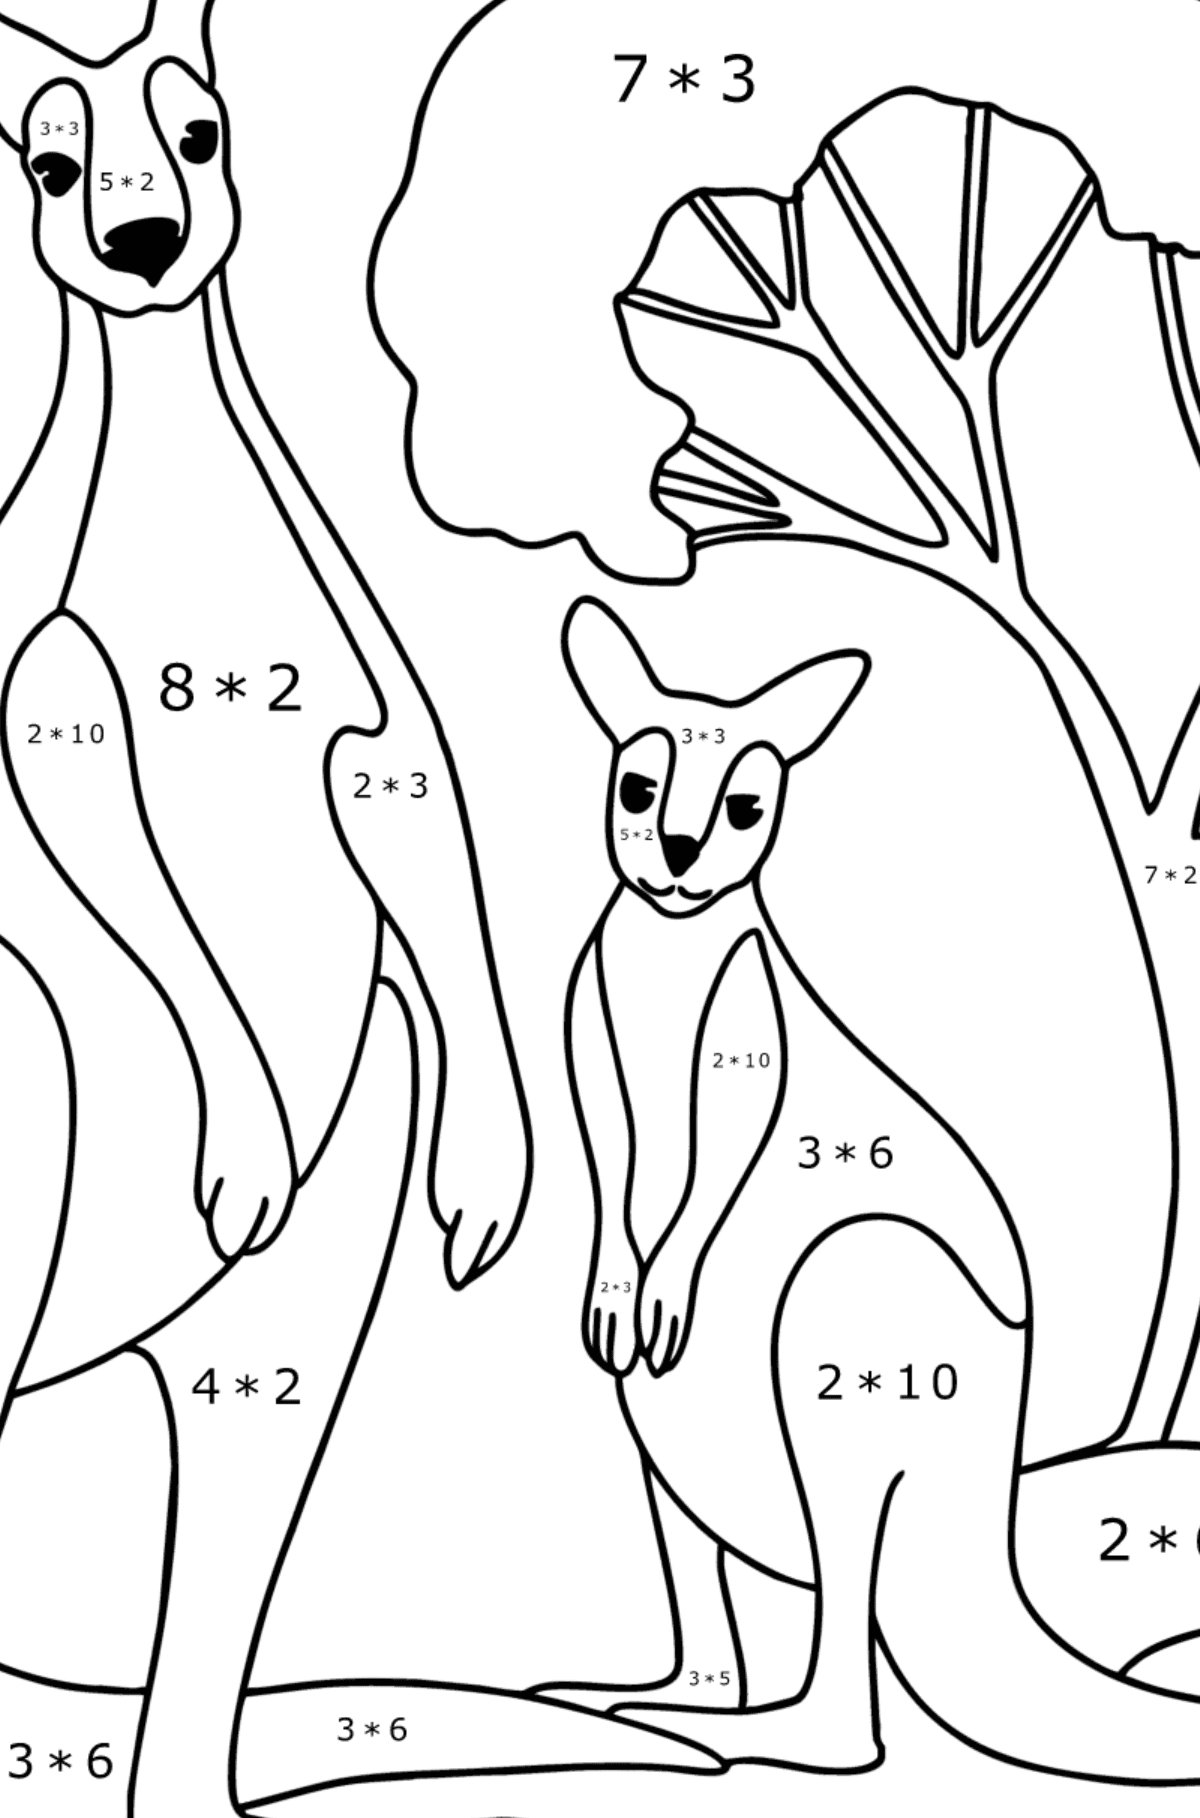 Kangaroo with Baby Coloring Page - Math Coloring - Multiplication for Kids